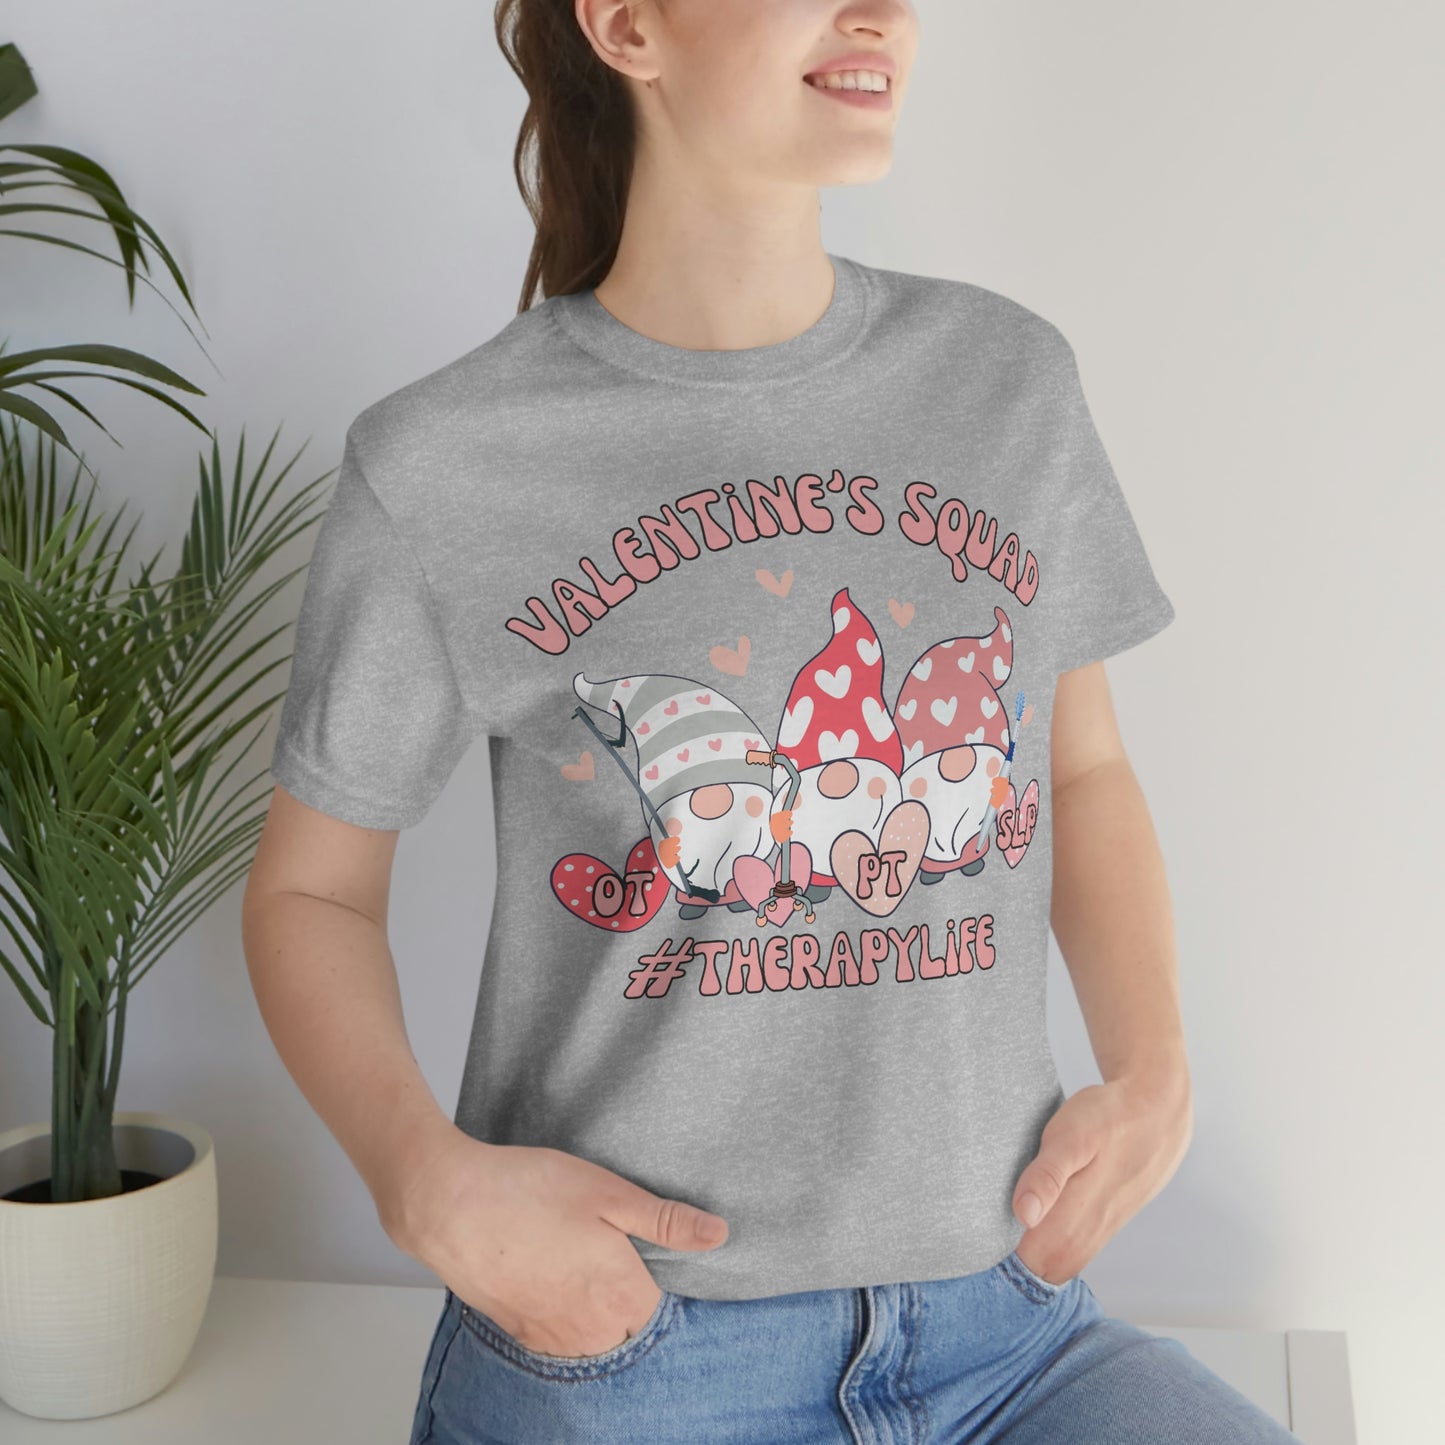 Valentine's Squad OT PT SLP Therapy Shirt Occupational Physical Speech Therapist